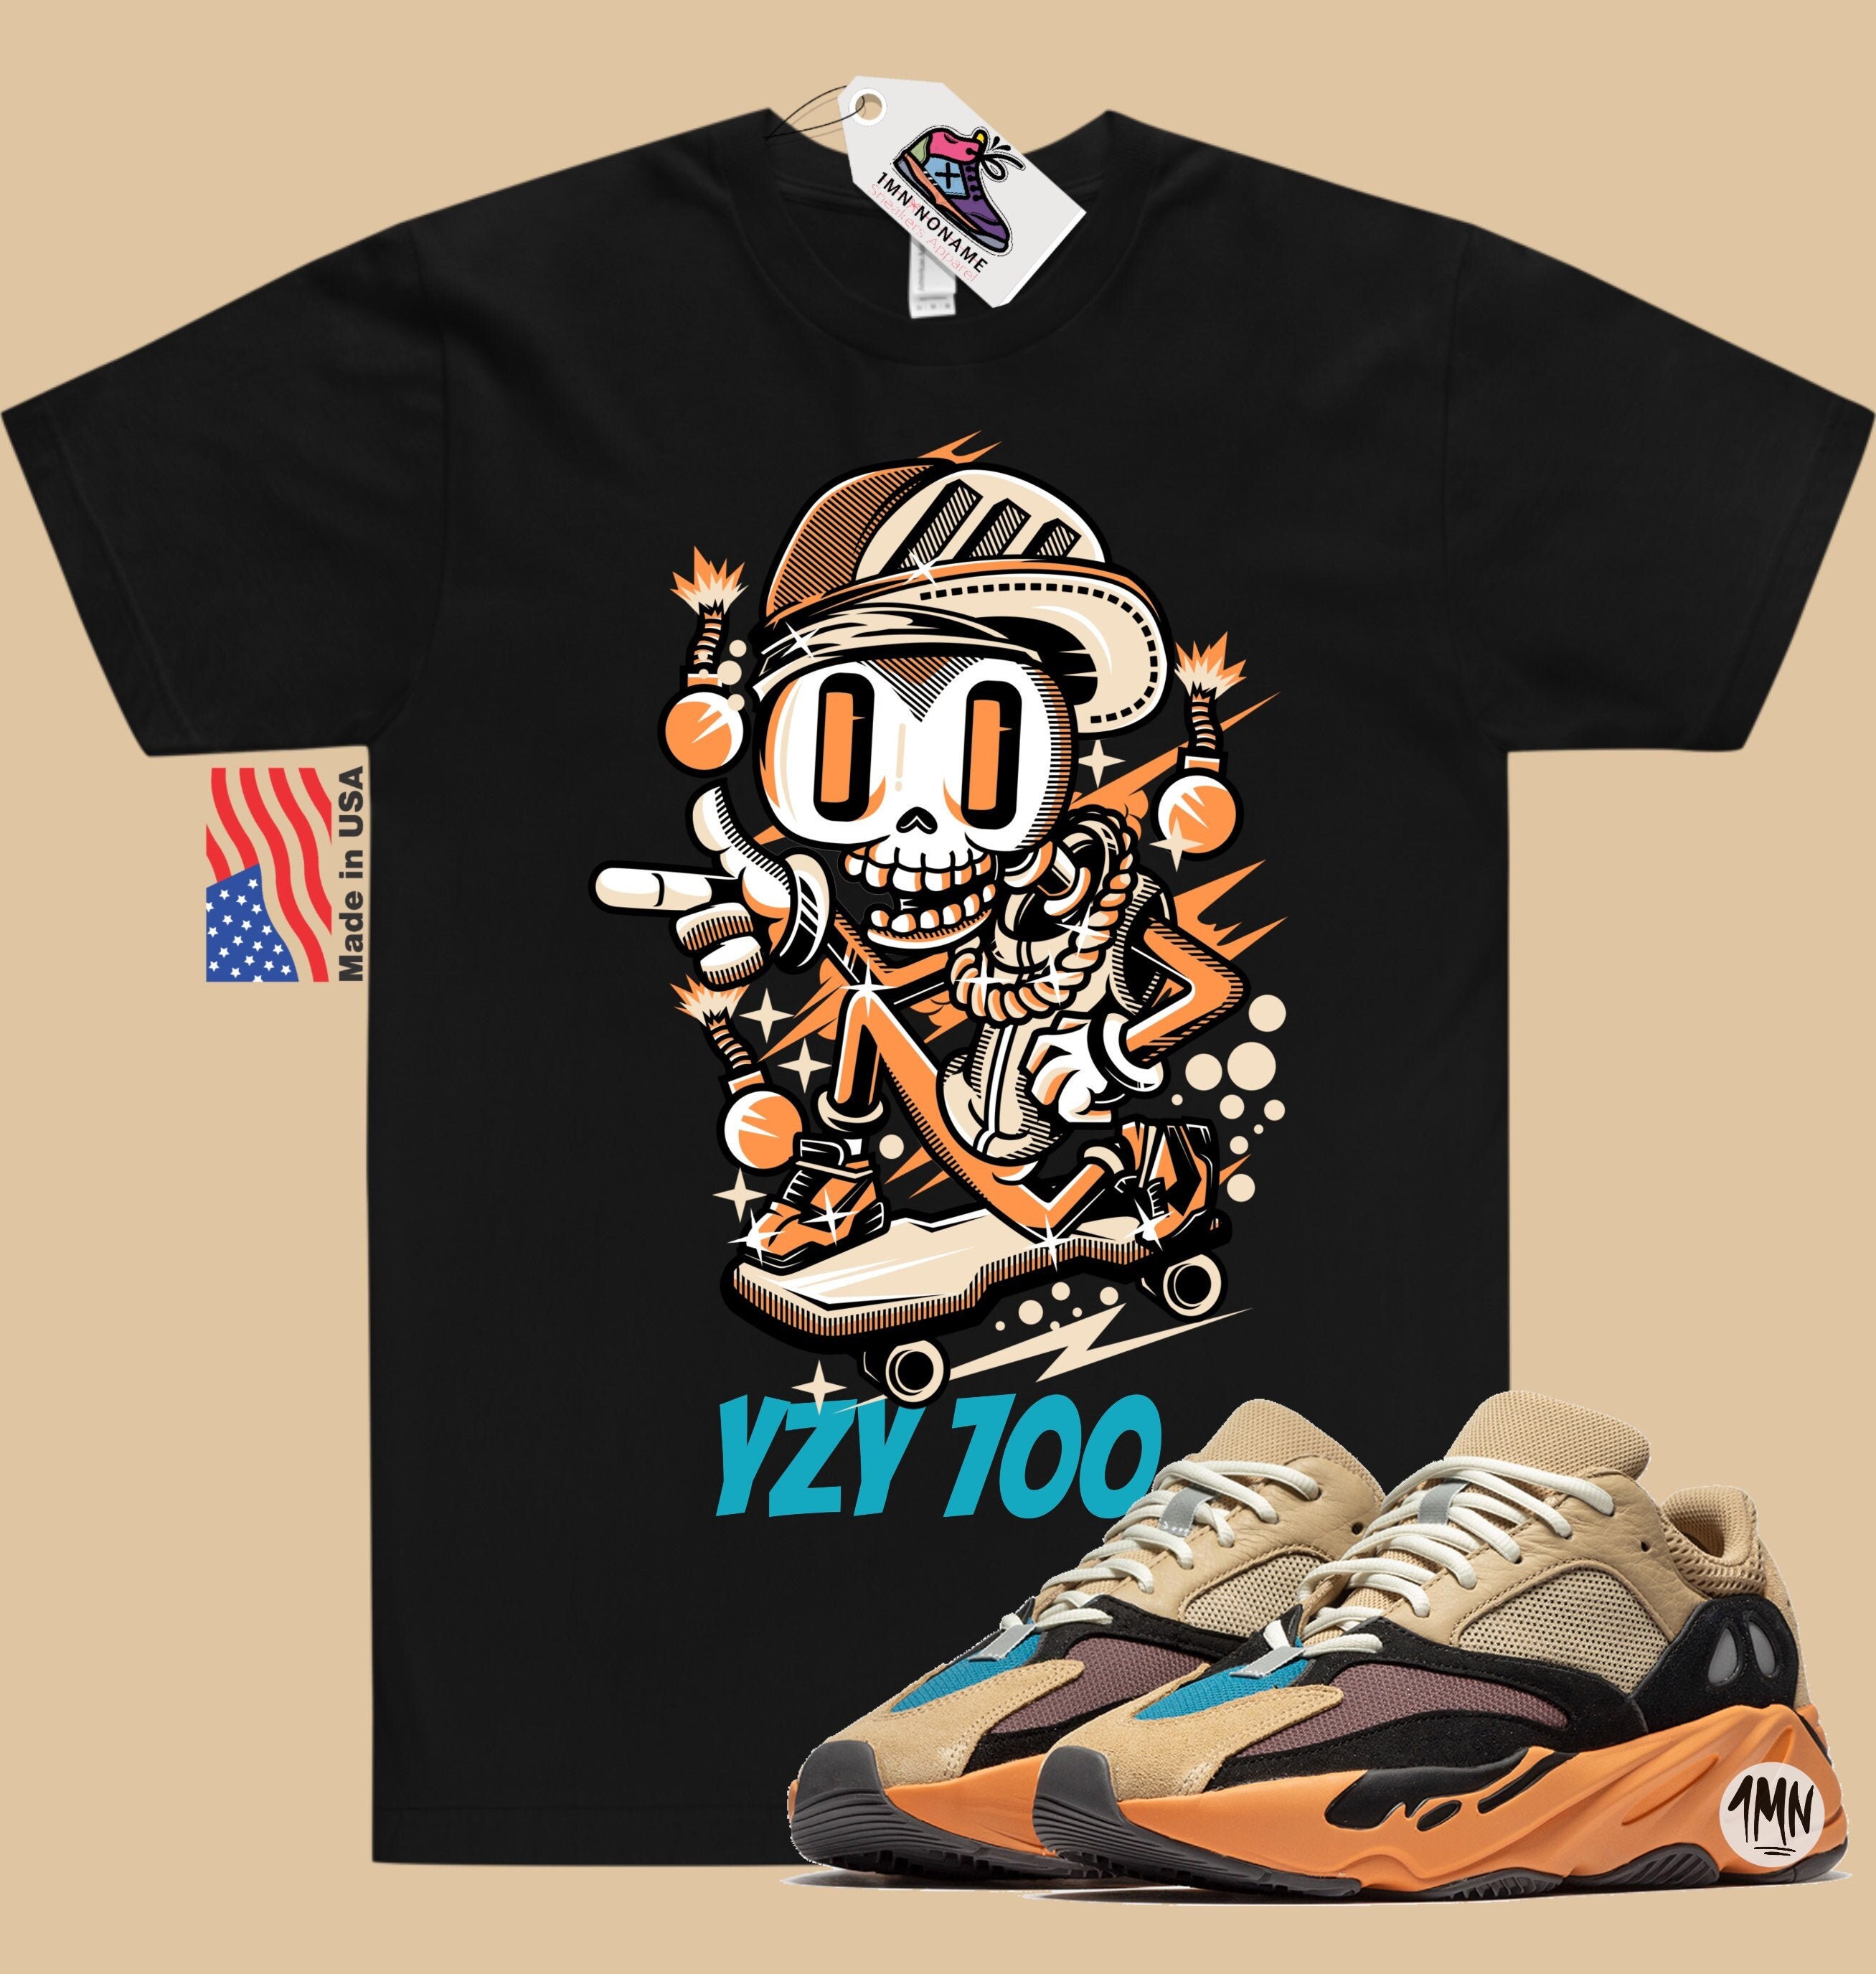 Yeezy Boost 700 Enflame Amber Match Shirt yzy Ride - Etsy UK